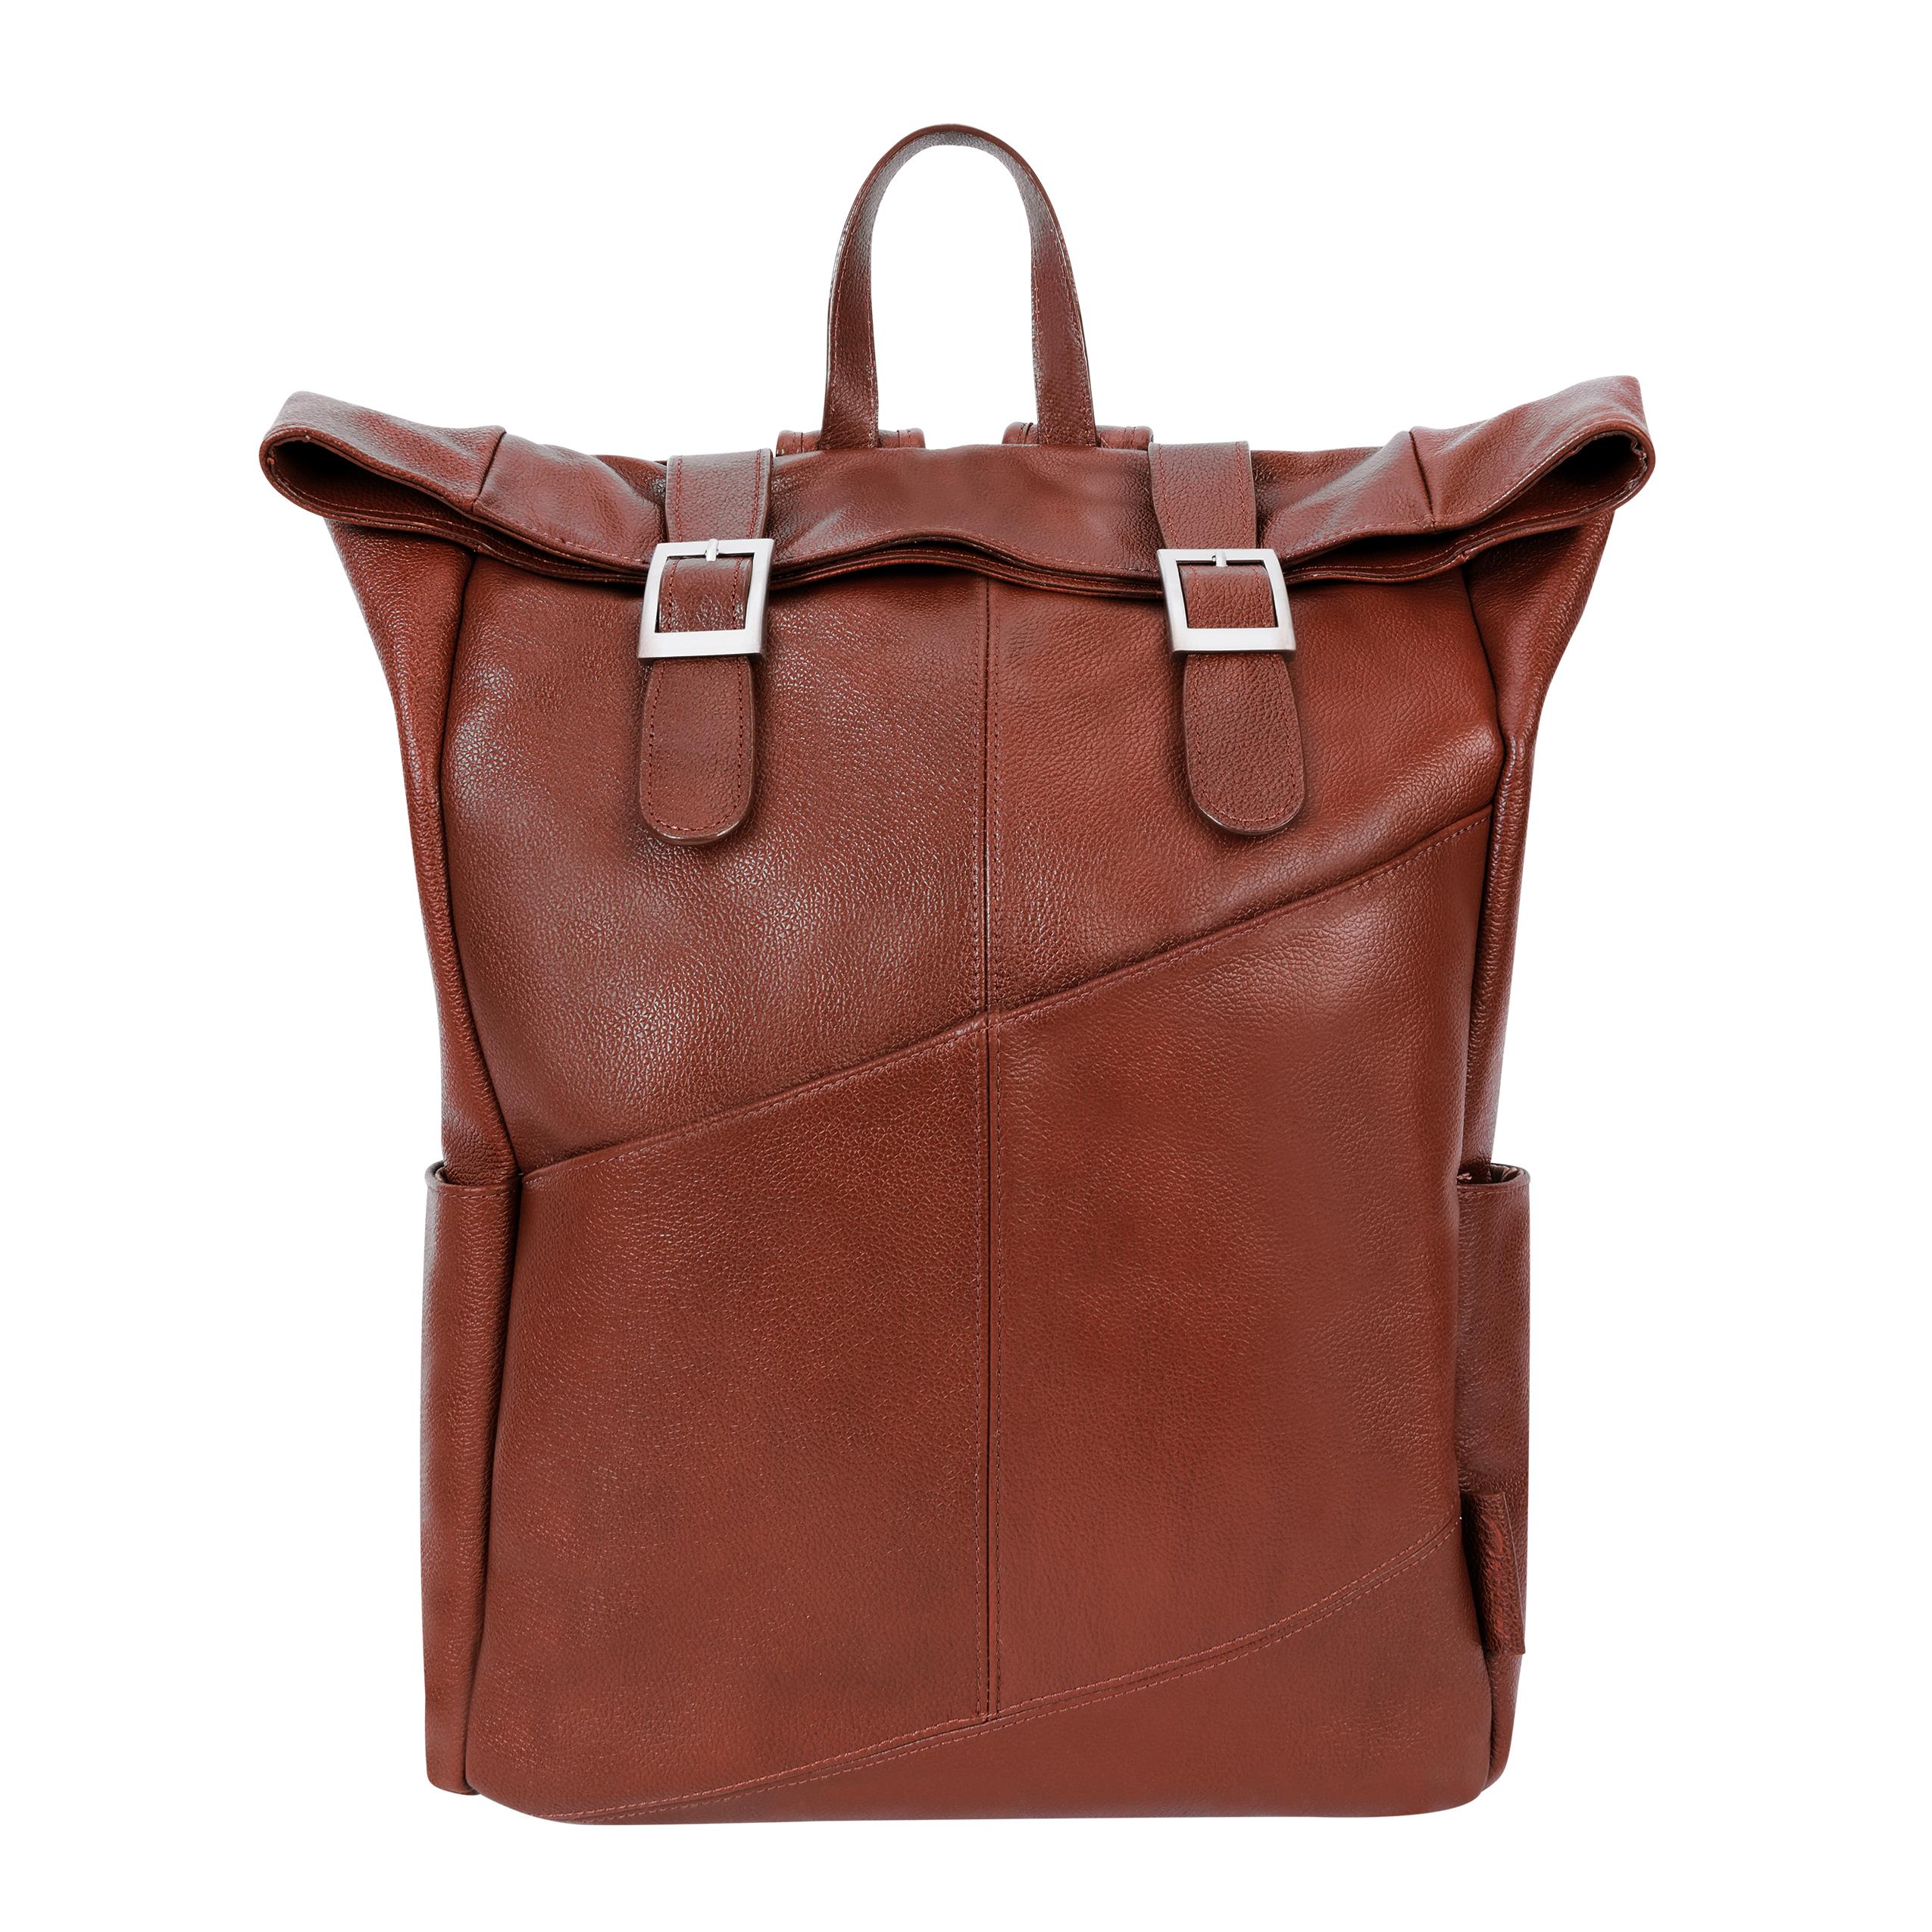 McKlein KENNEDY, Leather Dual Access Laptop Backpack, Pebble Grain Calfskin Leather, Brown (88734) - image 3 of 10